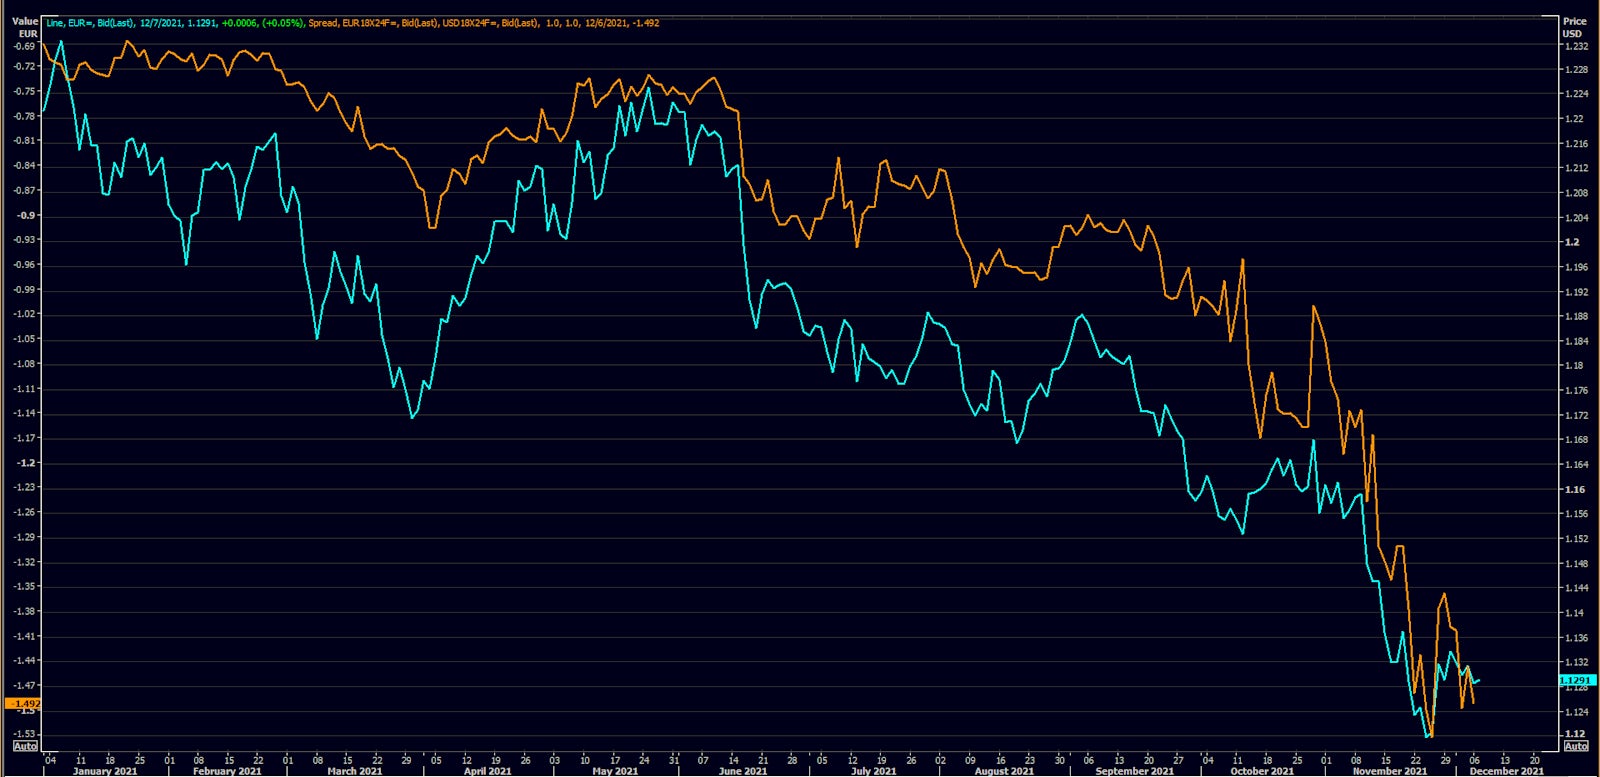 Euro spot rate vs EUR-USD Rates Differential (6-Month Rates 18 Months Forward) | Source: Refinitiv